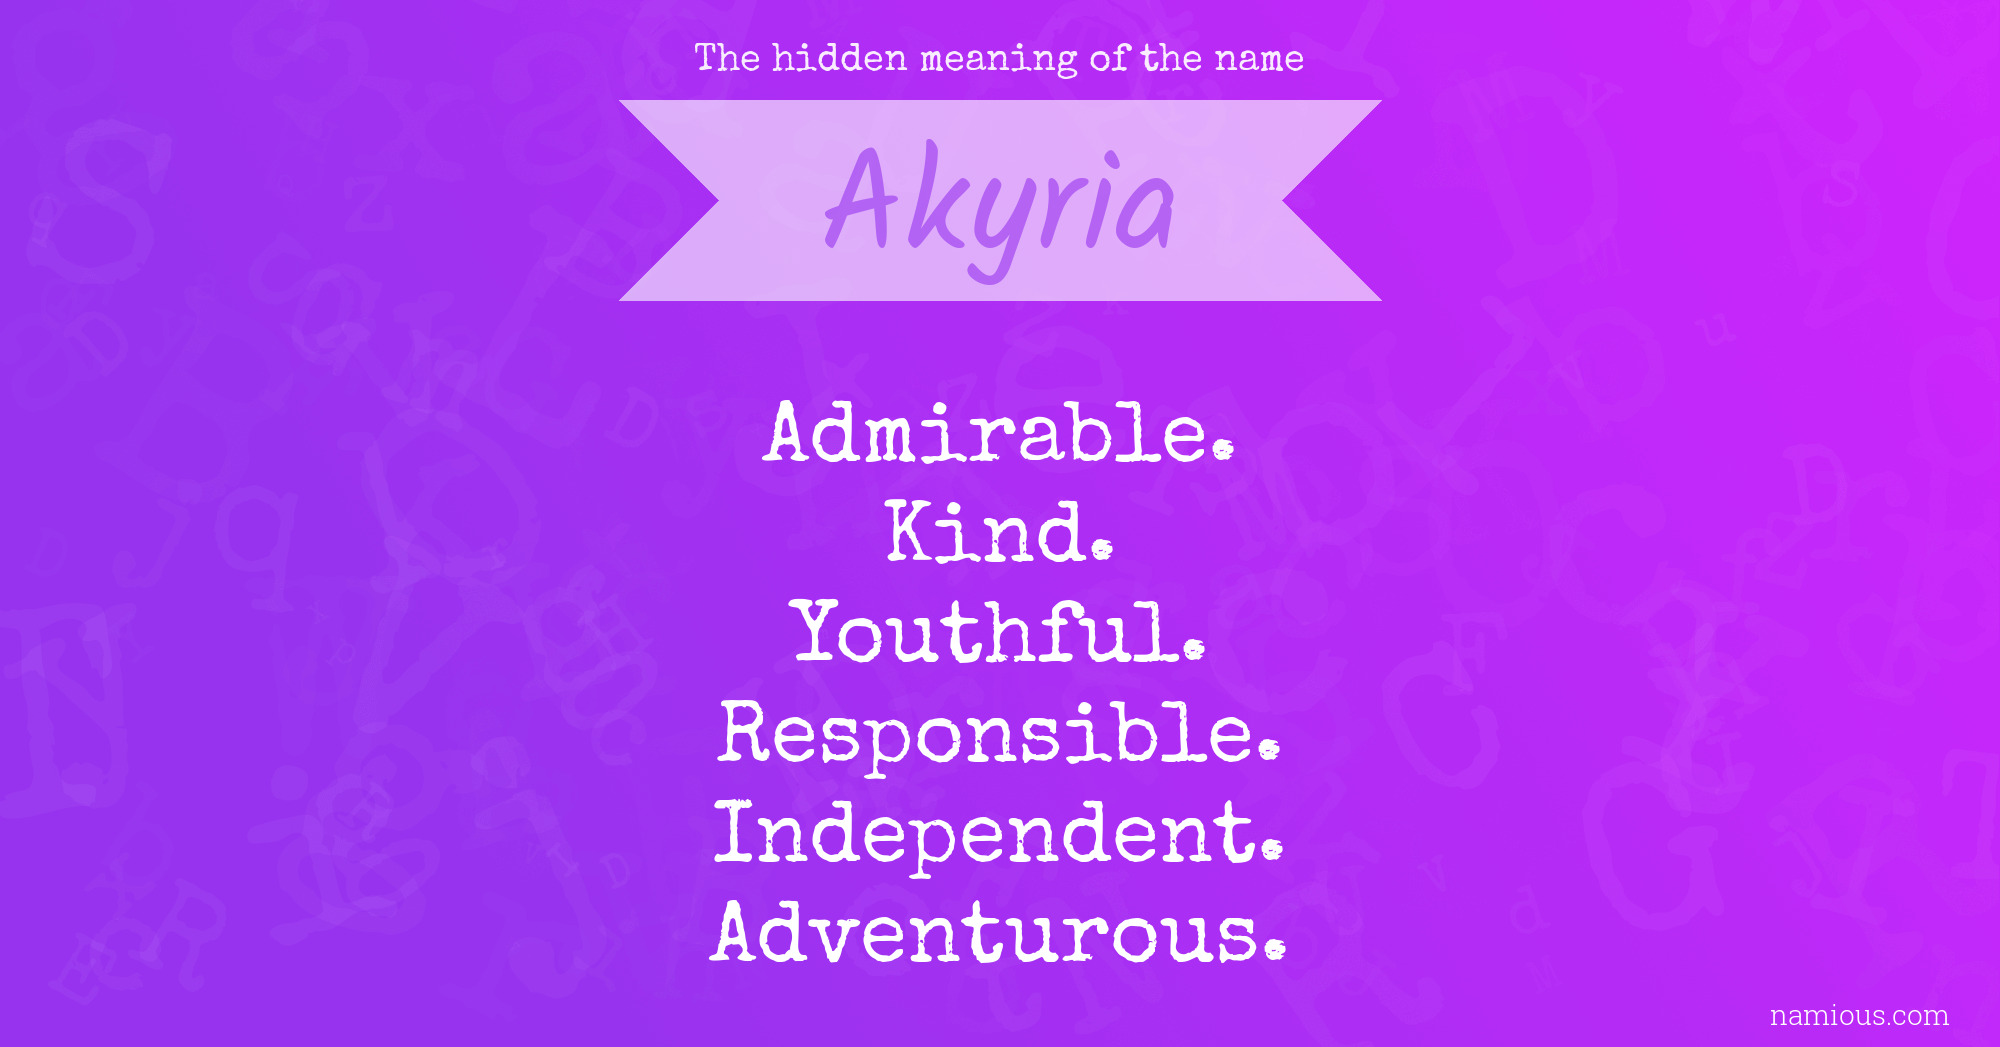 The hidden meaning of the name Akyria